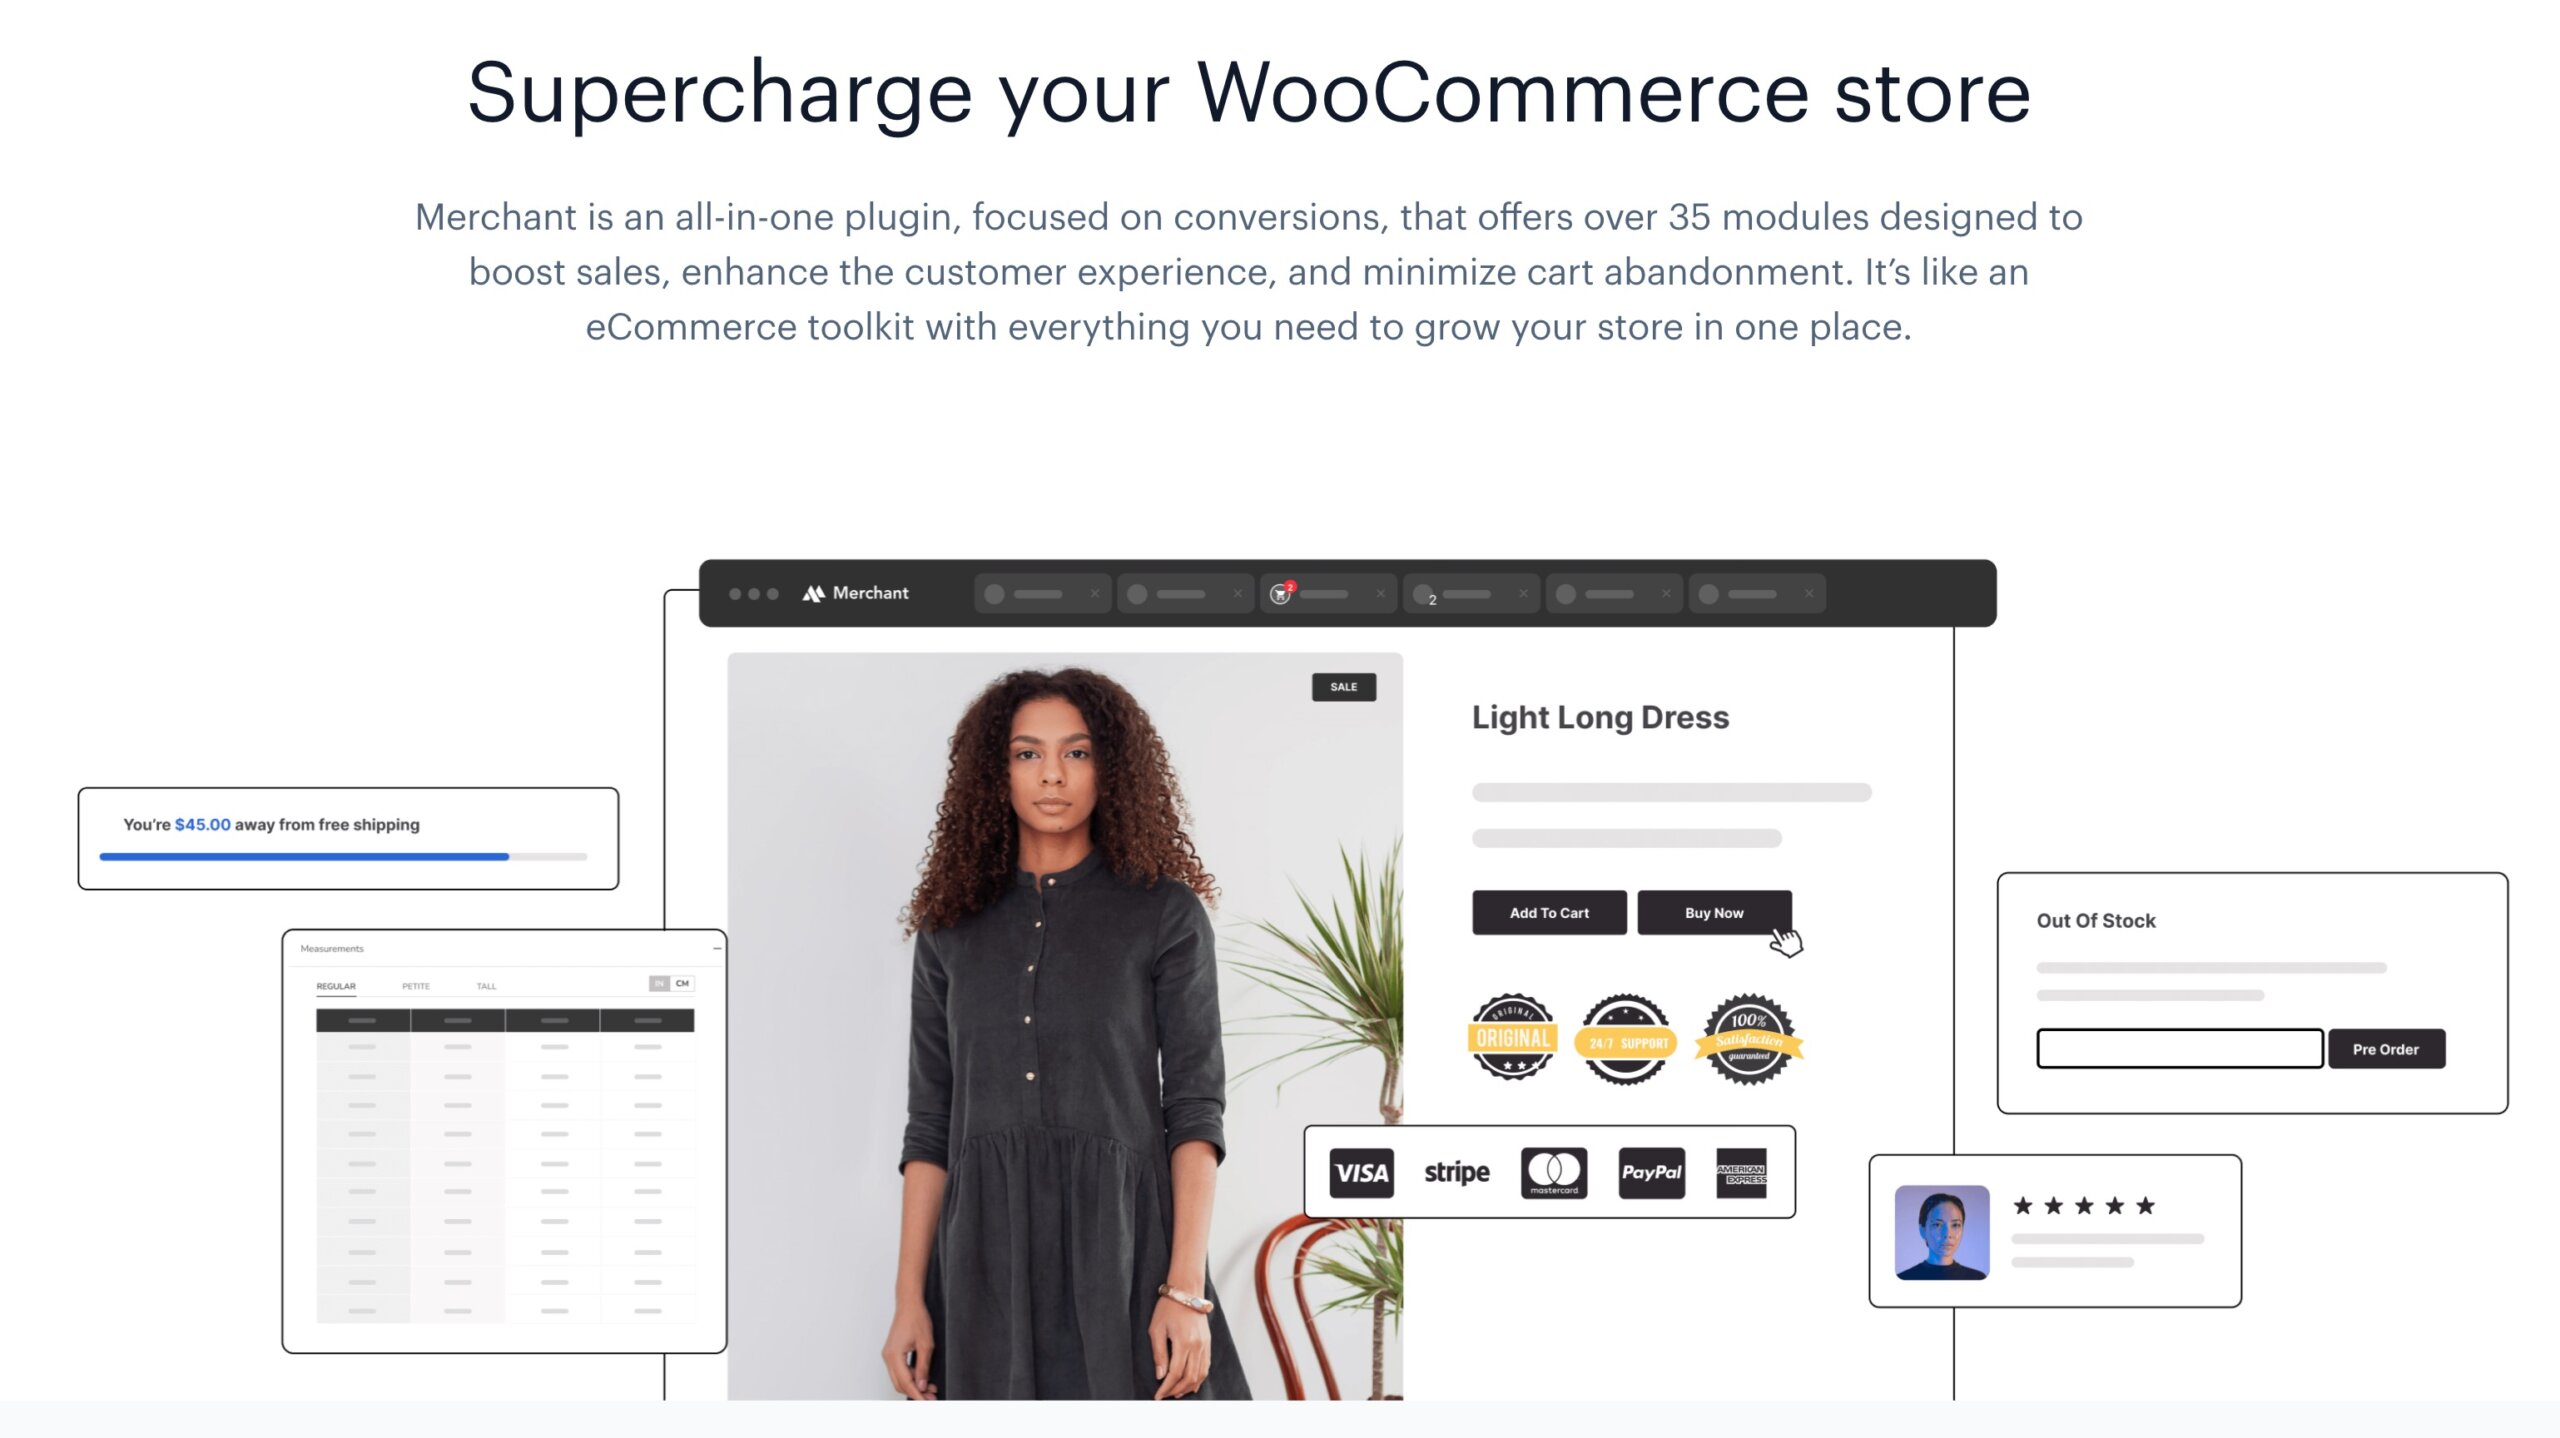 The Merchant plugin for WooCommerce stores